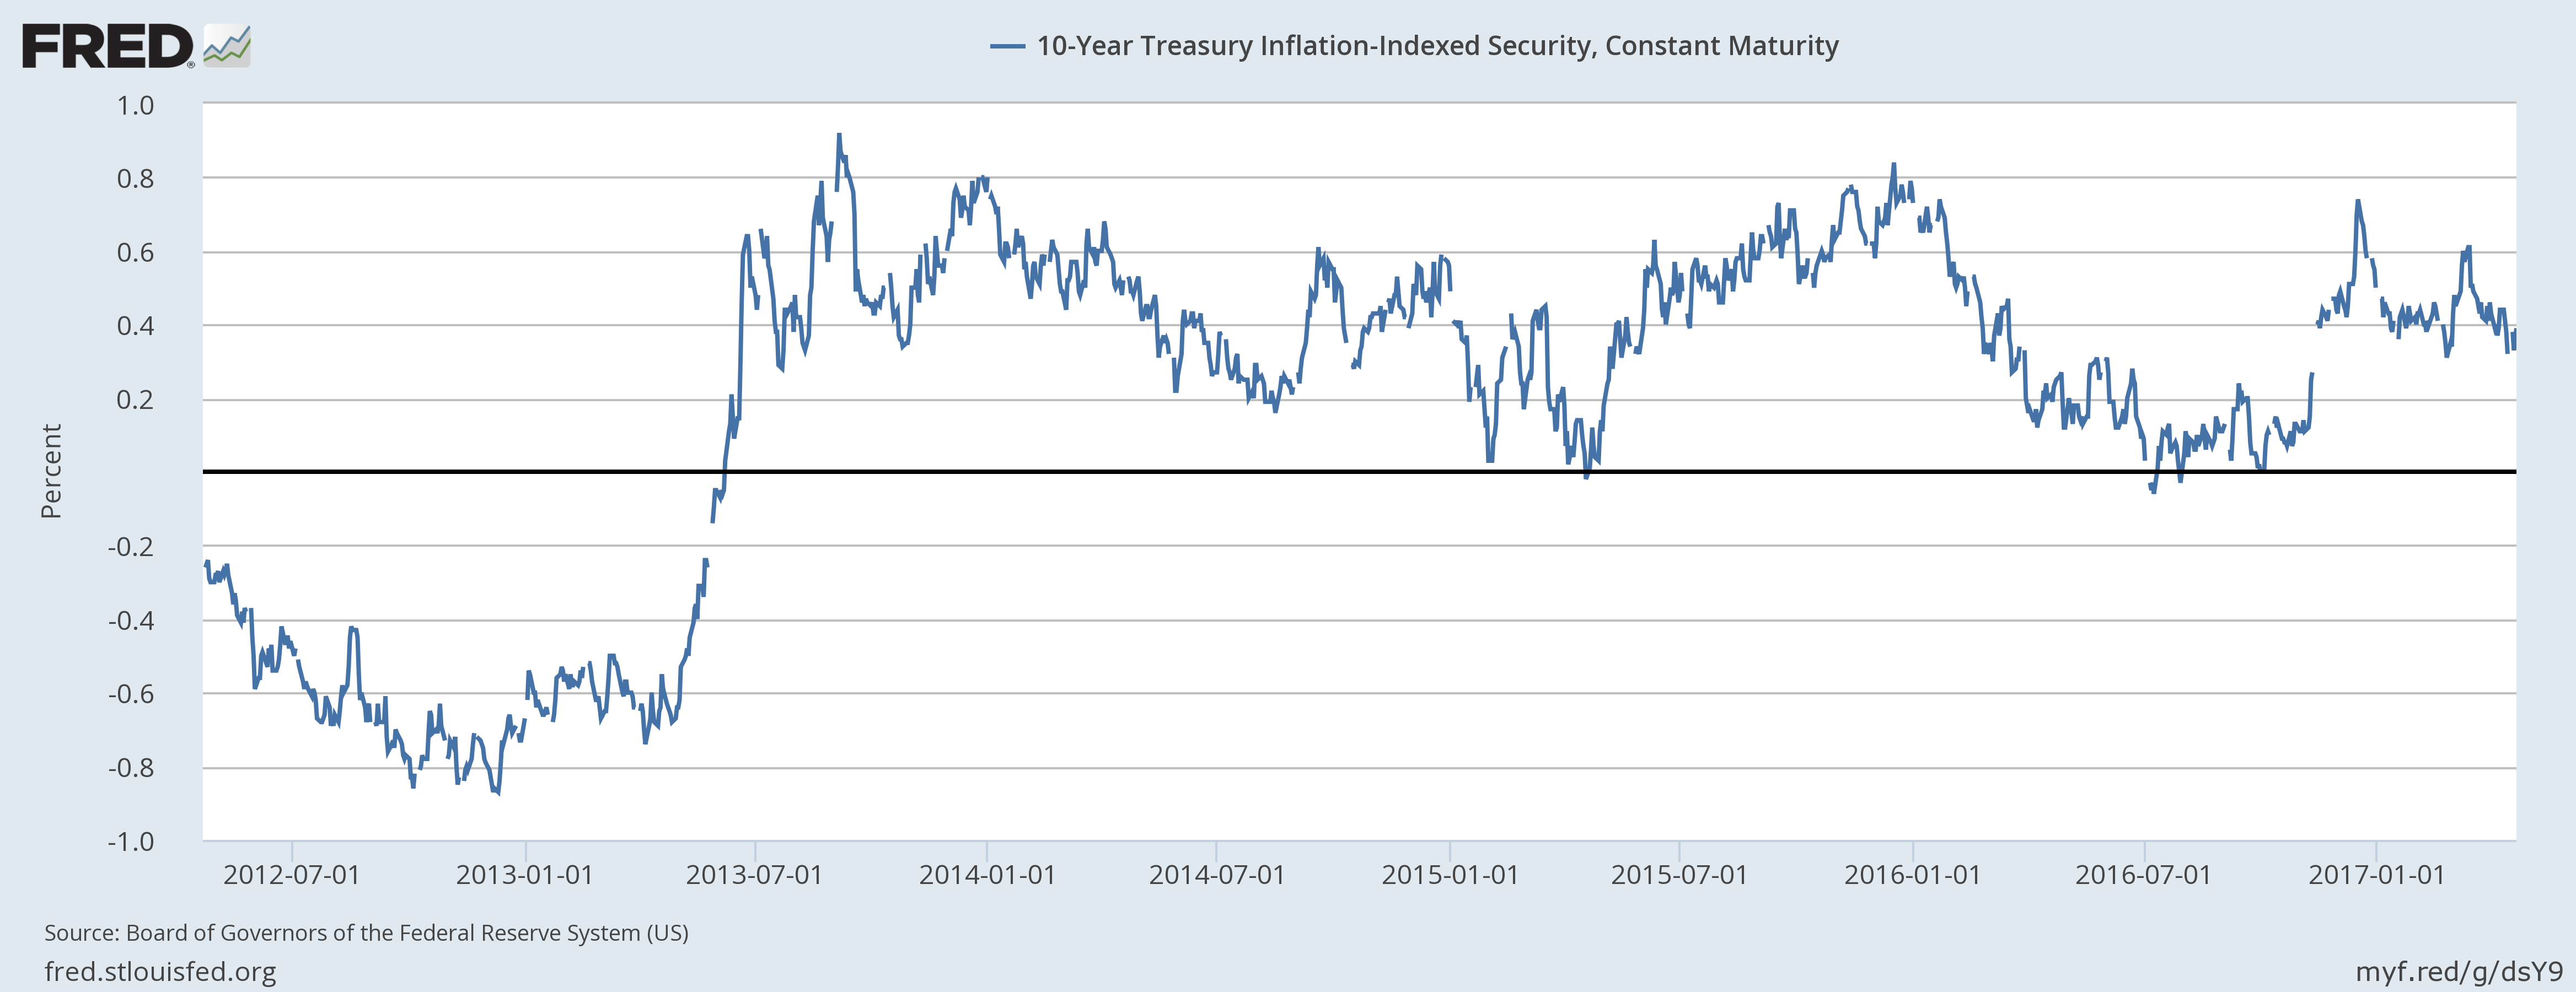 10 Year Treasury Inflation Indexed Security, Constant Maturity